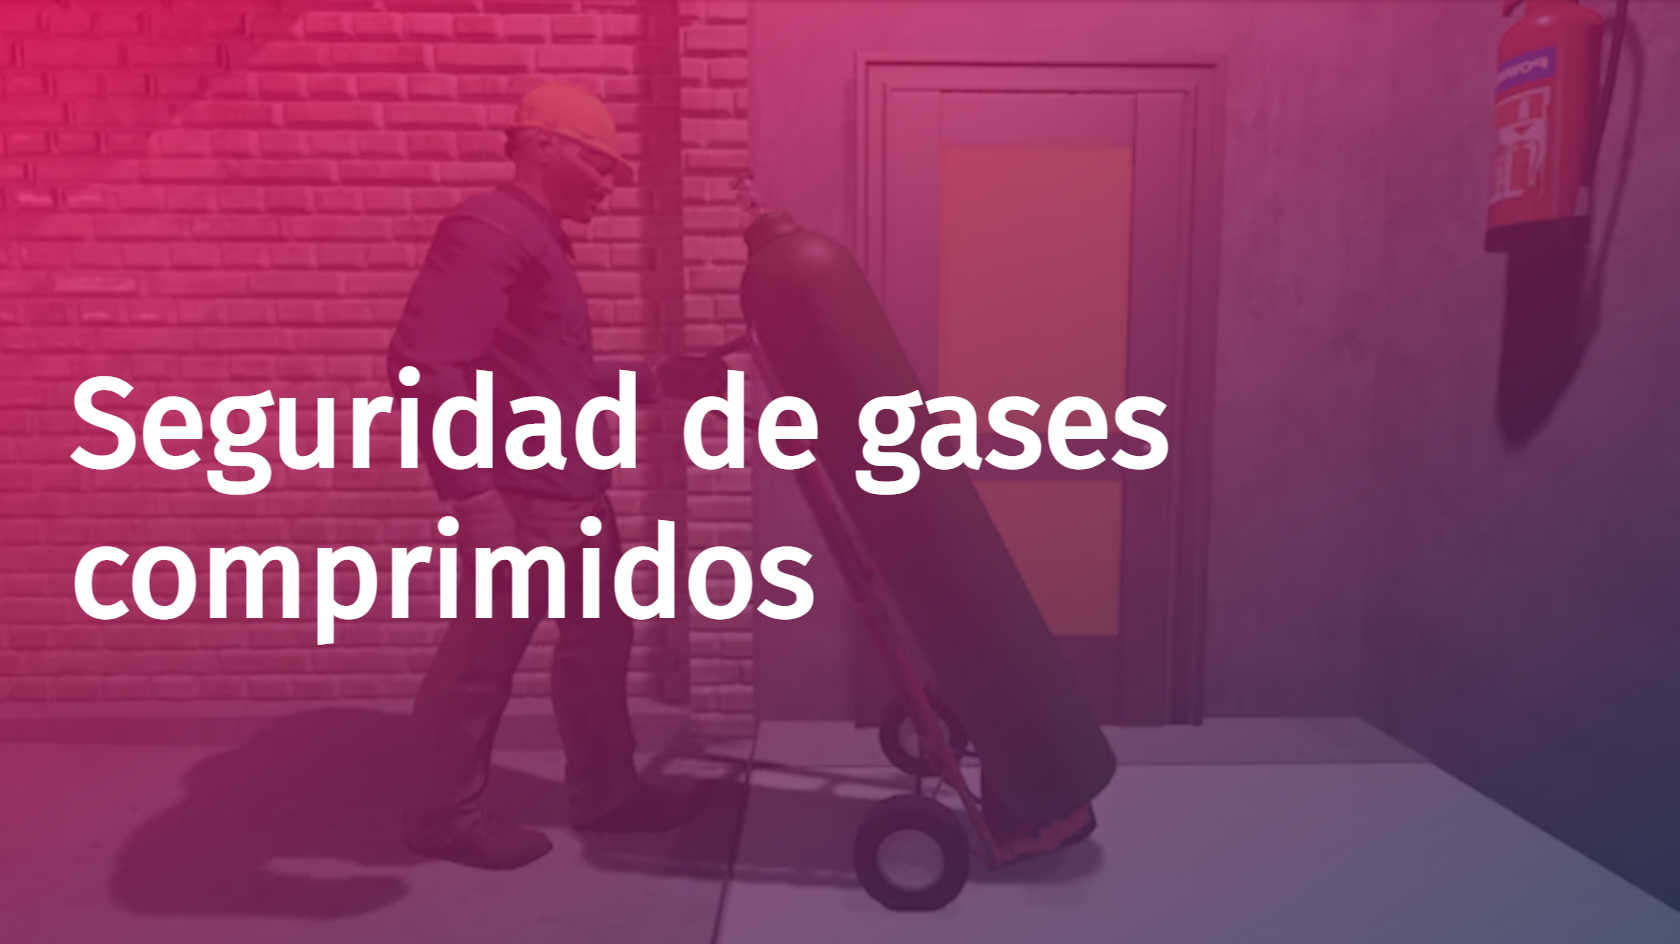 Spanish - Compressed Gas Safety